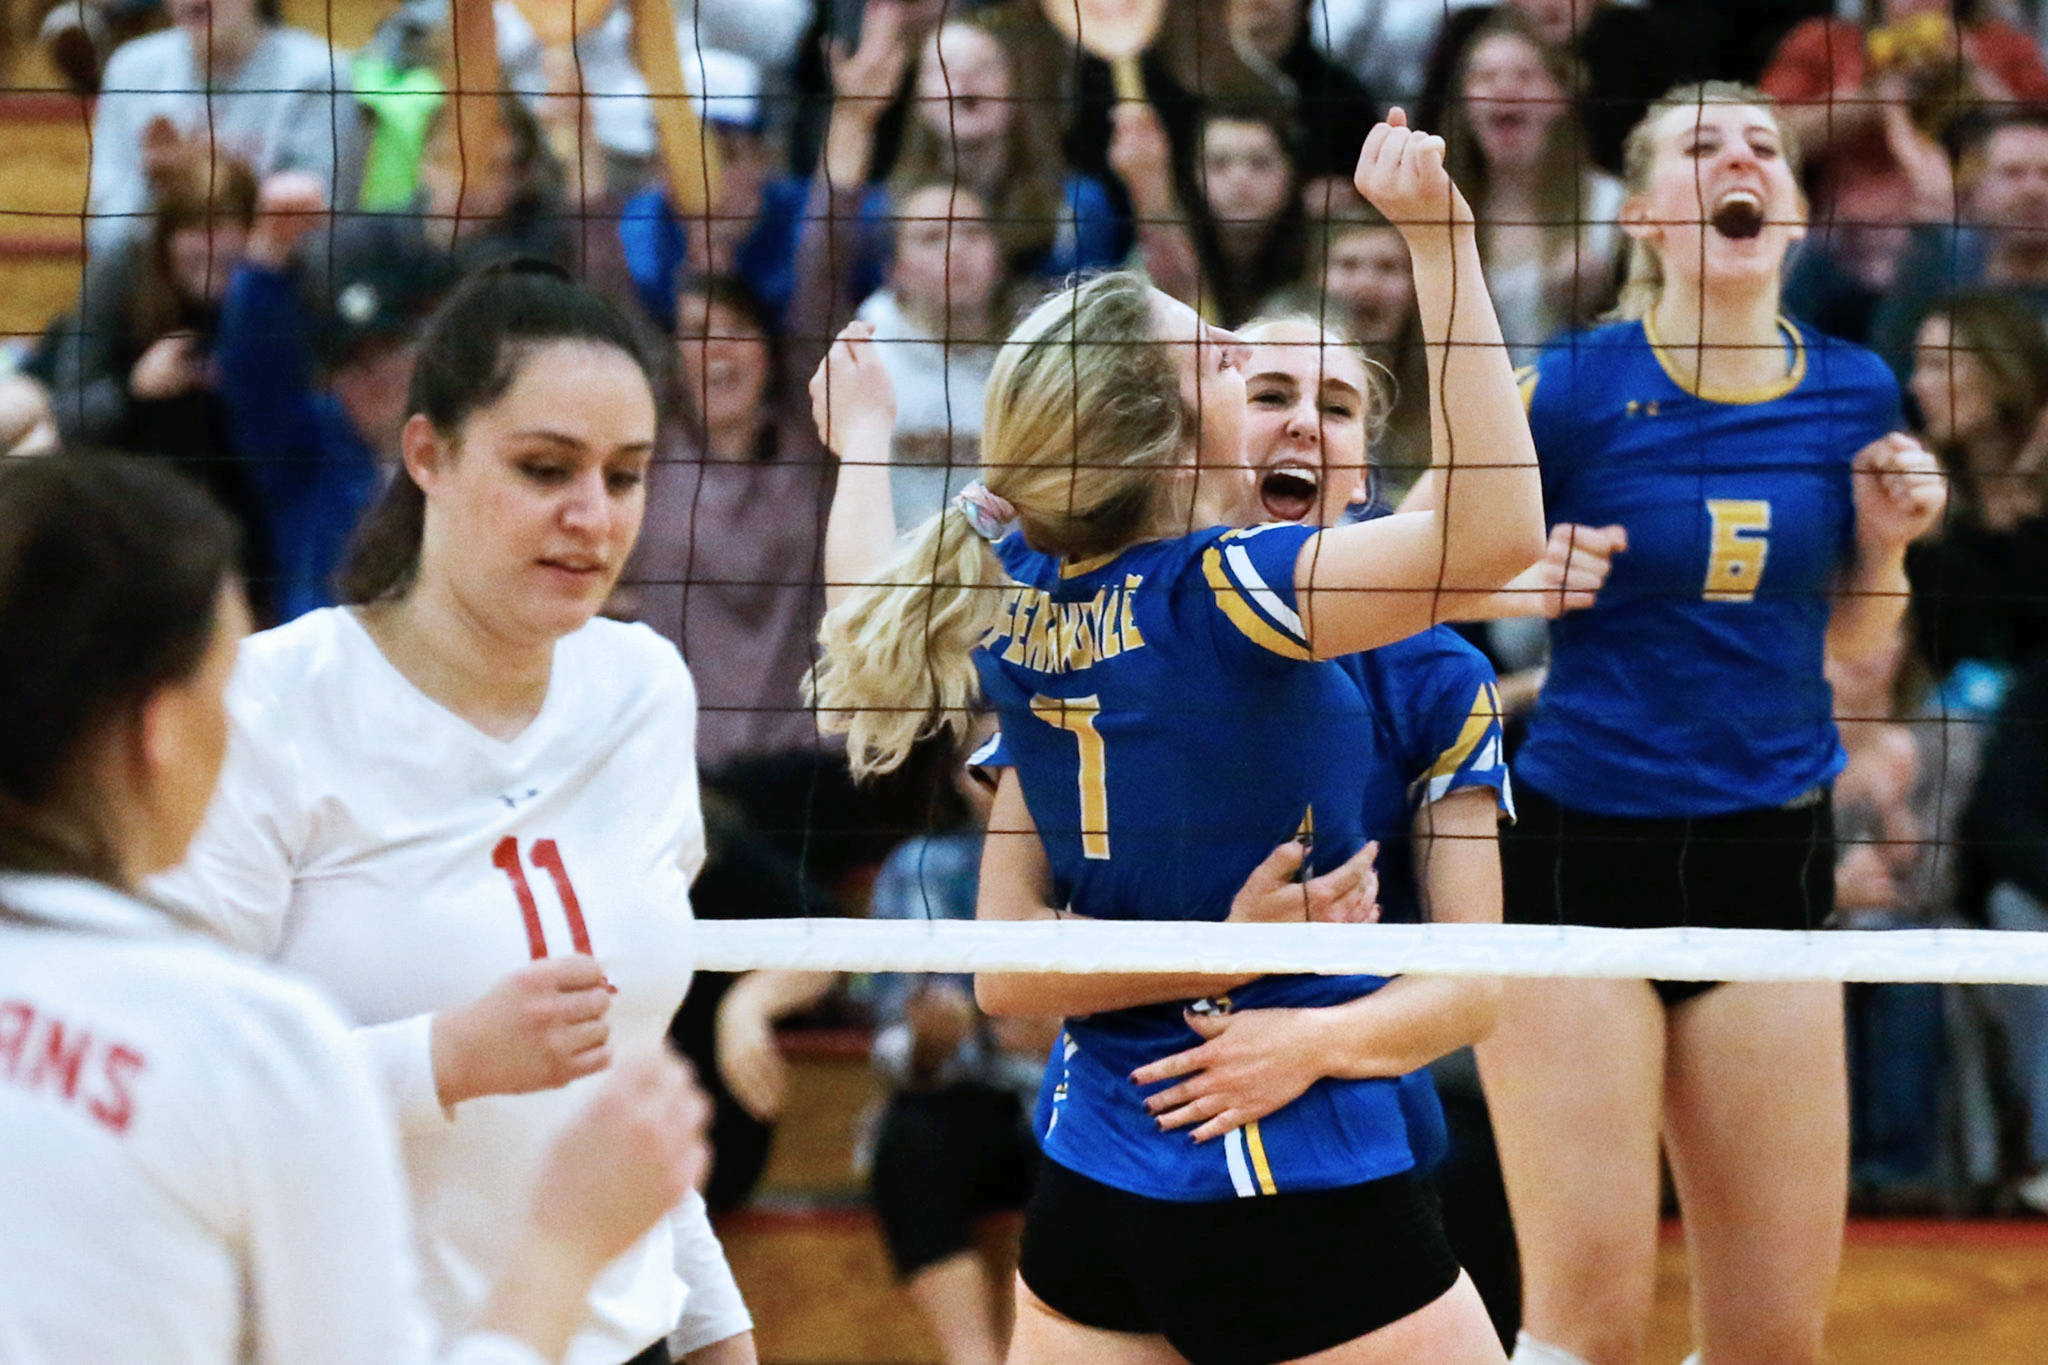 Ferndale celebrates a point against Stanwood on Thursday night at Marysville Pilchuck High School. Ferndale won in straight sets. (Kevin Clark / The Herald)